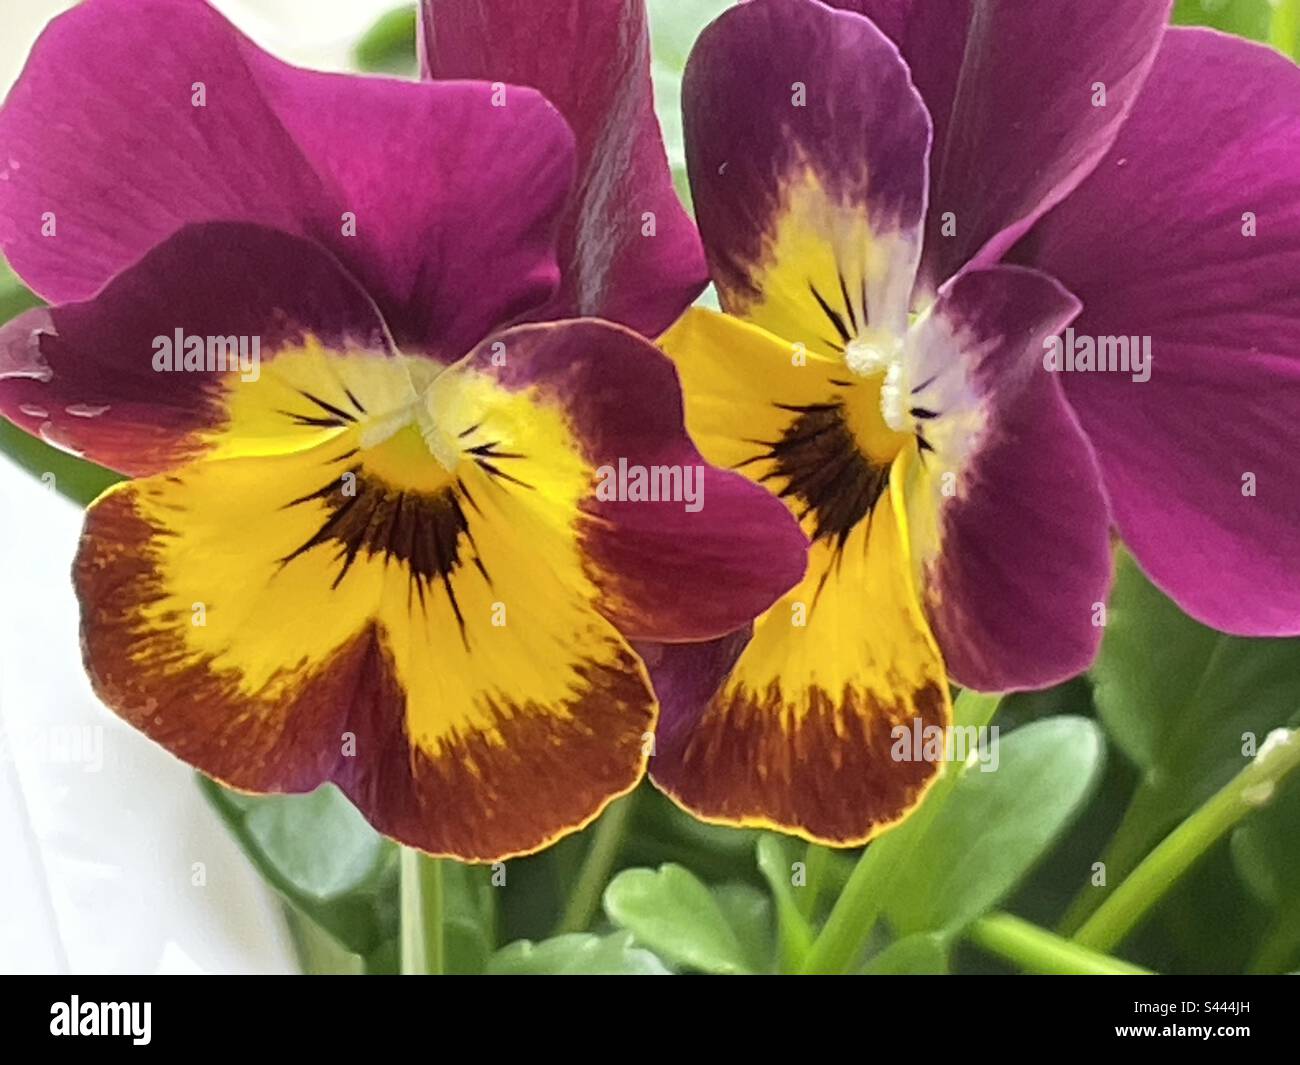 Two gorgeous pansies a must for gardens Stock Photo